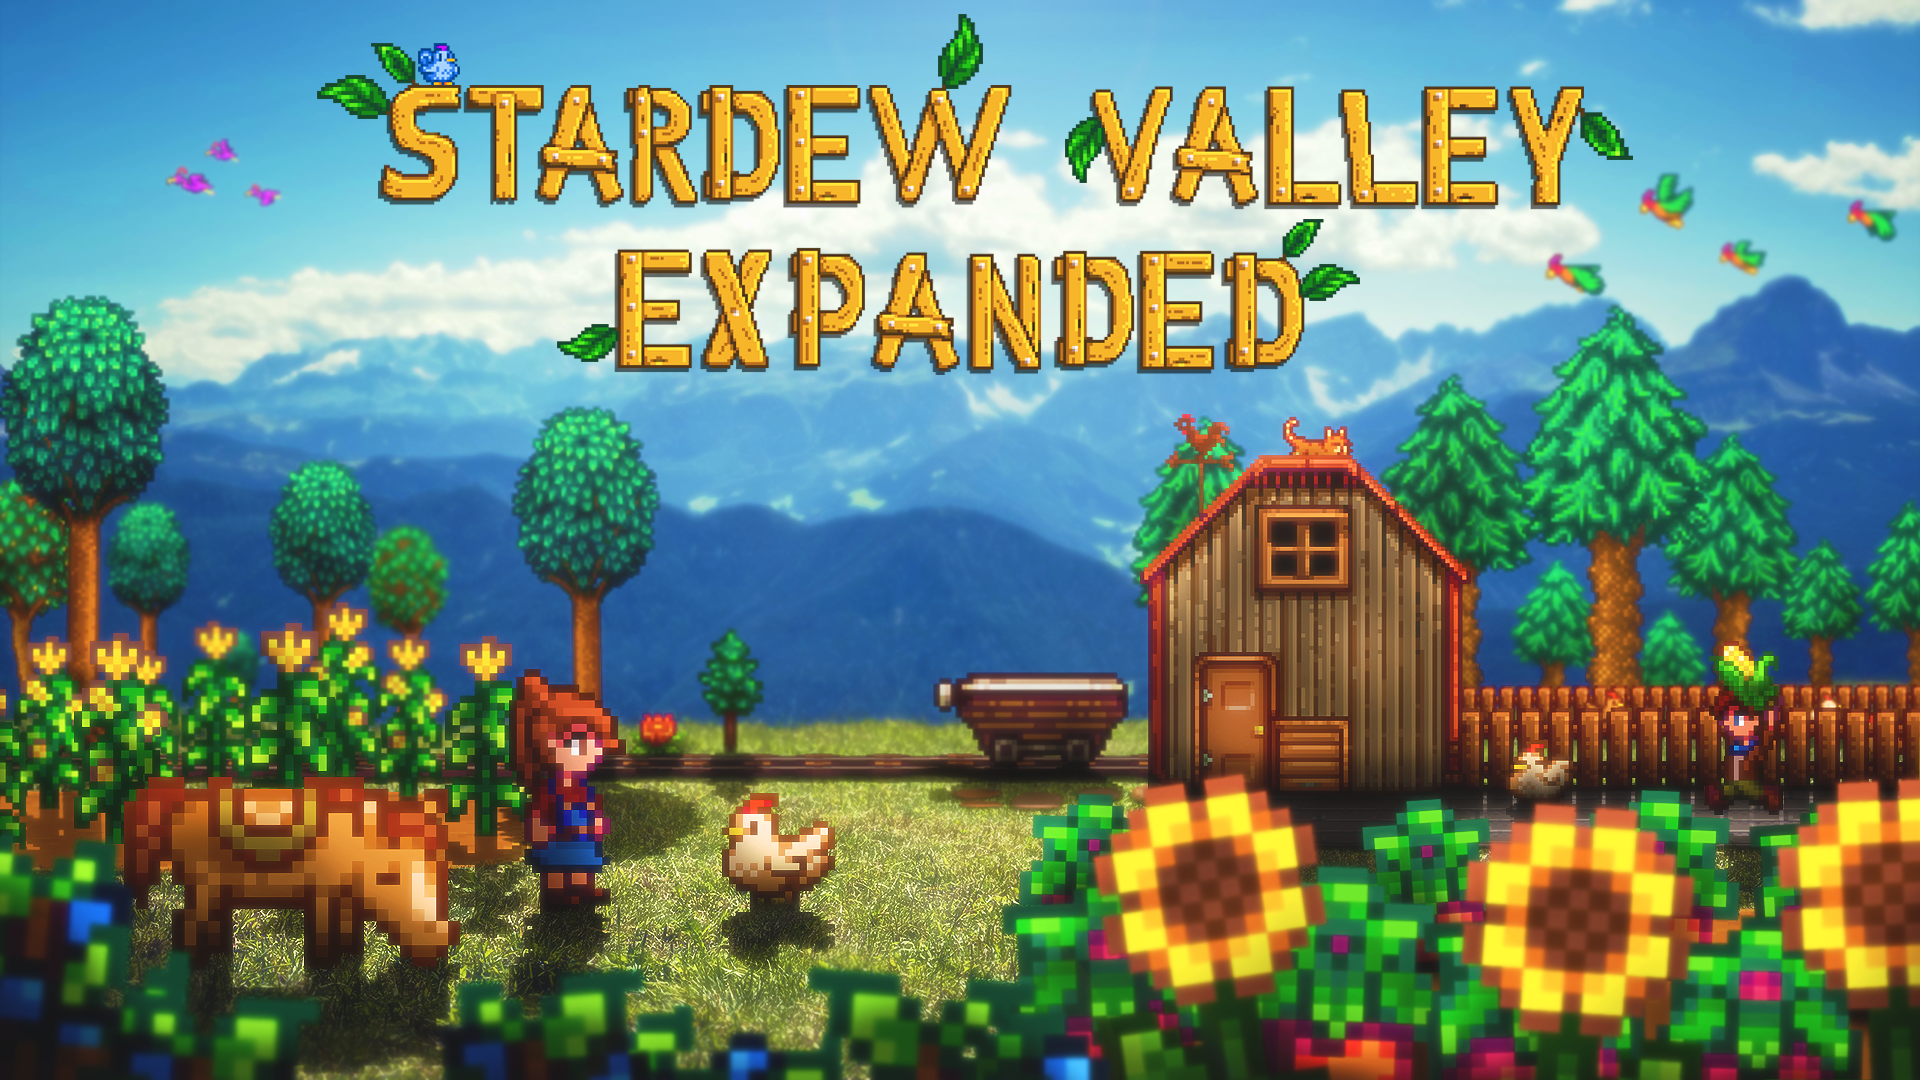 Stardew Valley Expanded wallpaper